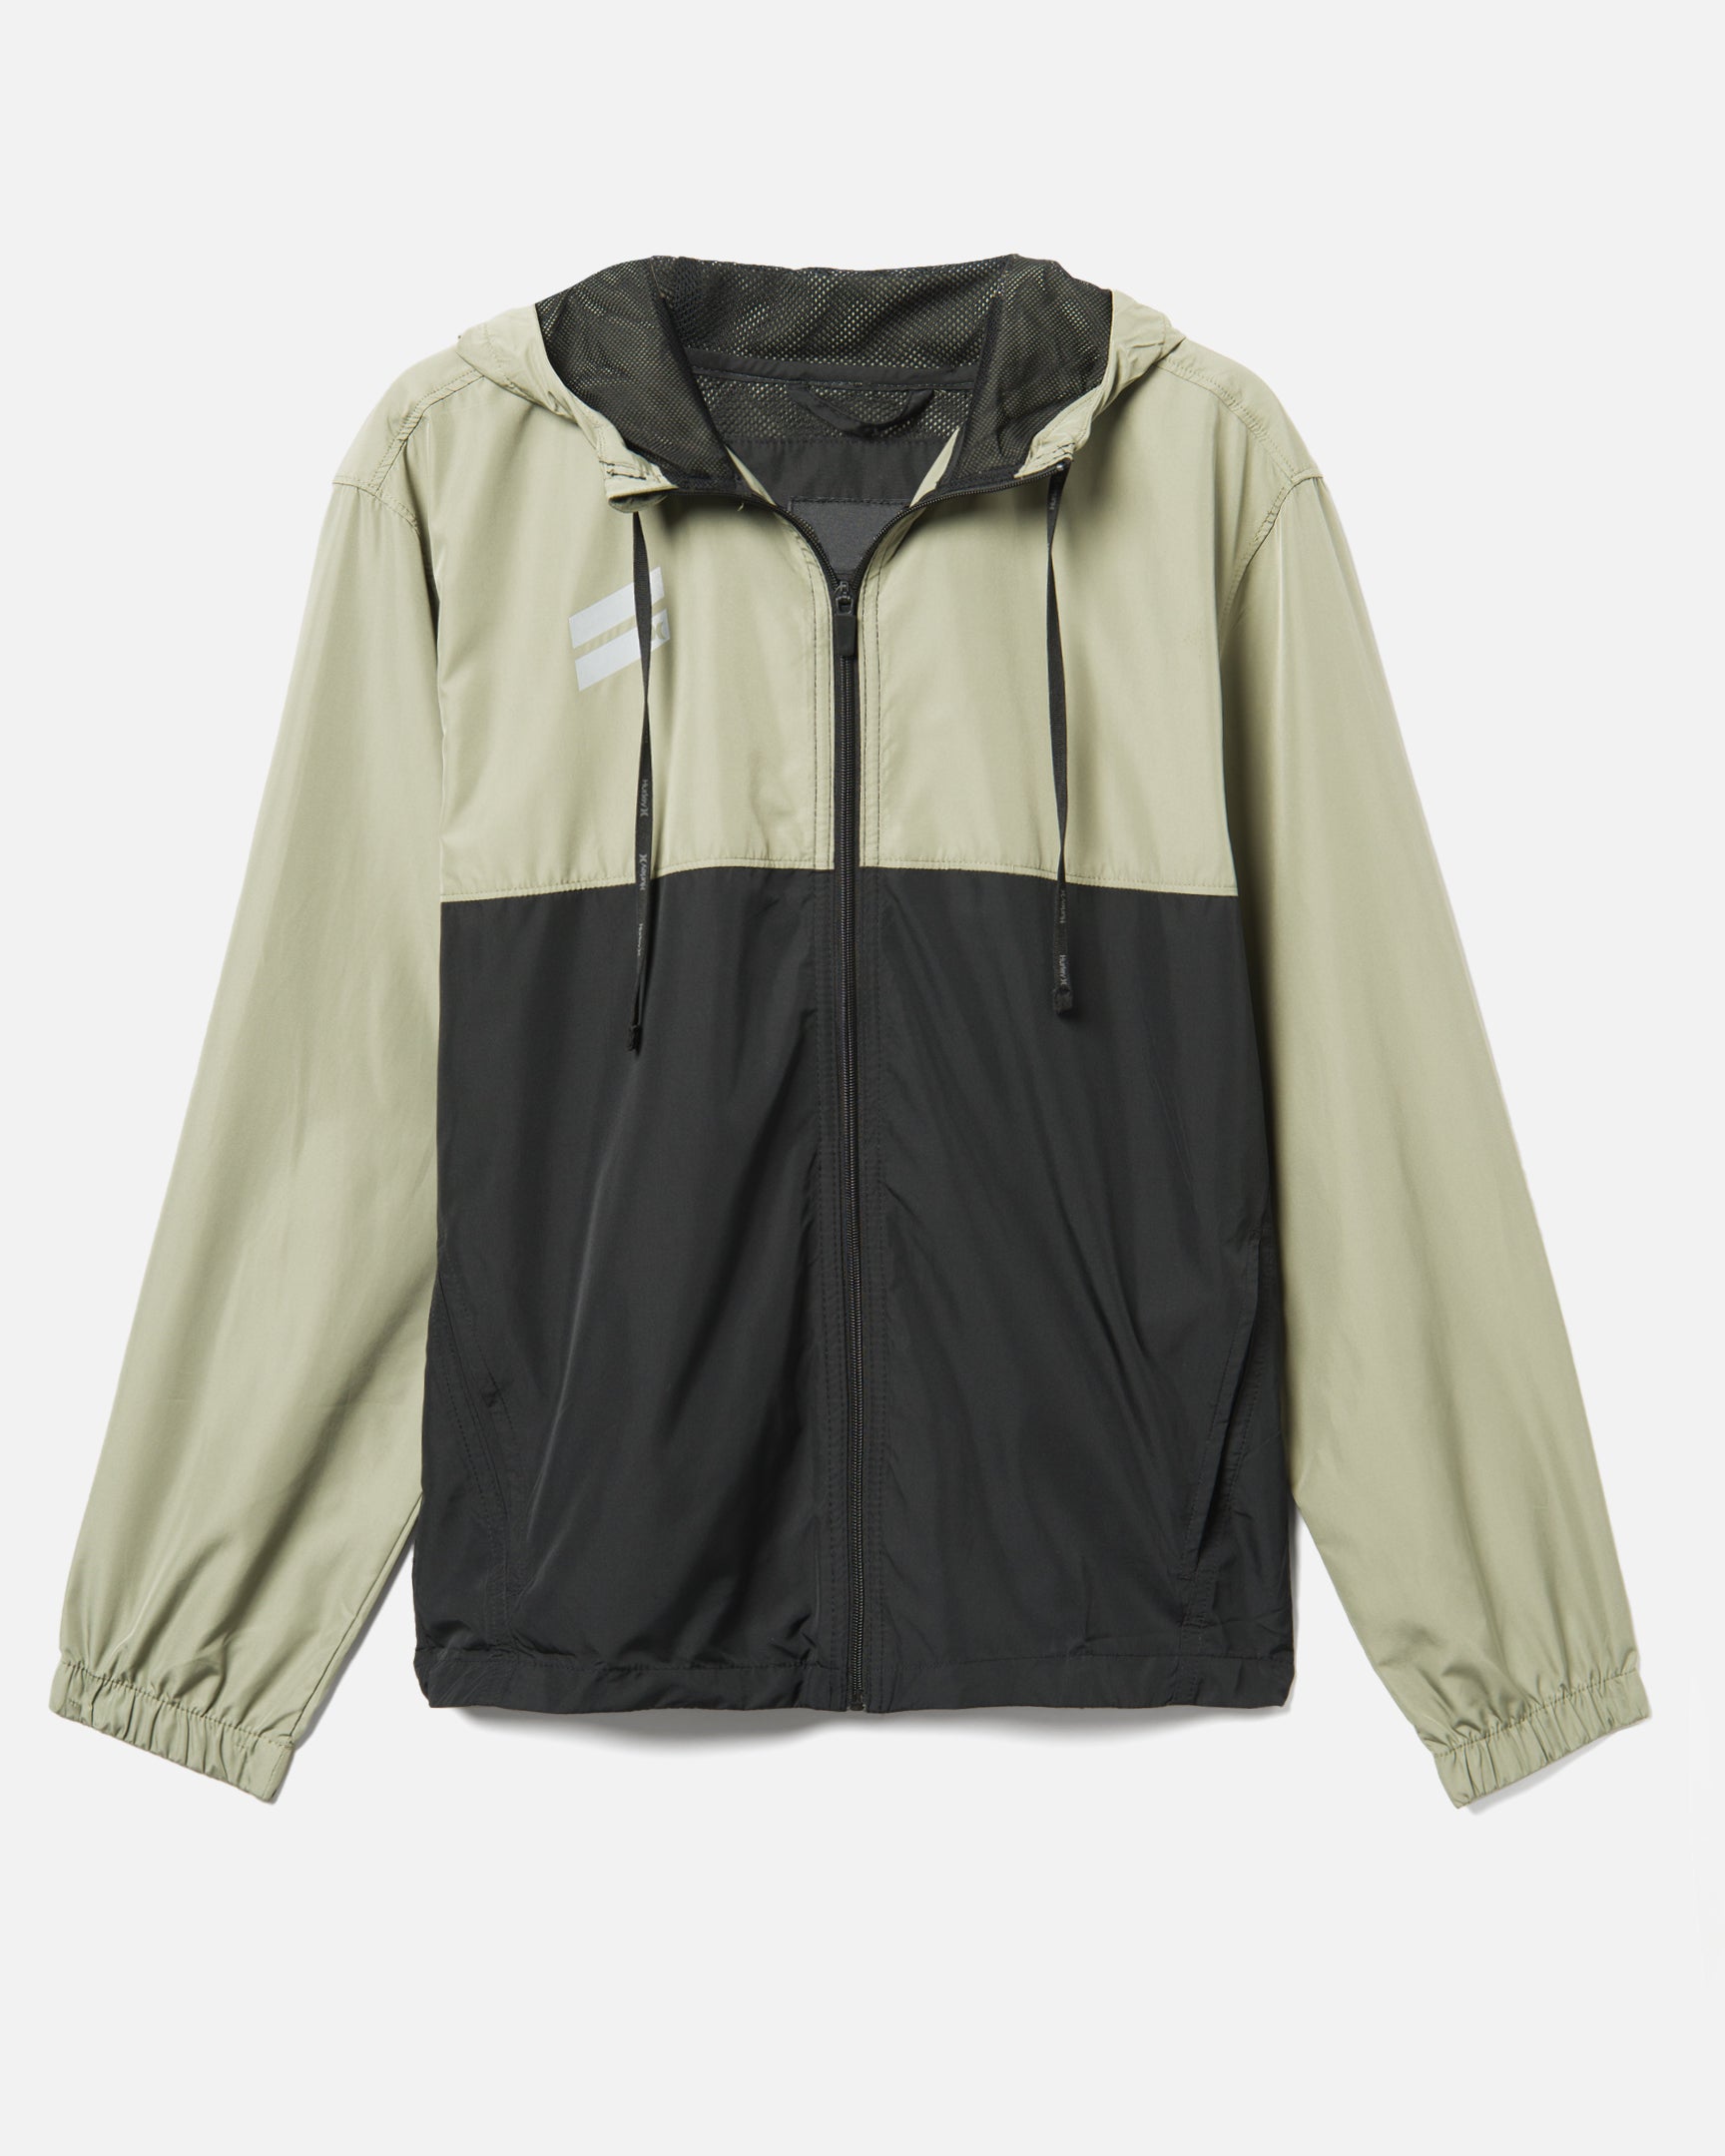 Golden Doodle - Charger Sherpa Lined Hooded Jacket | Hurley